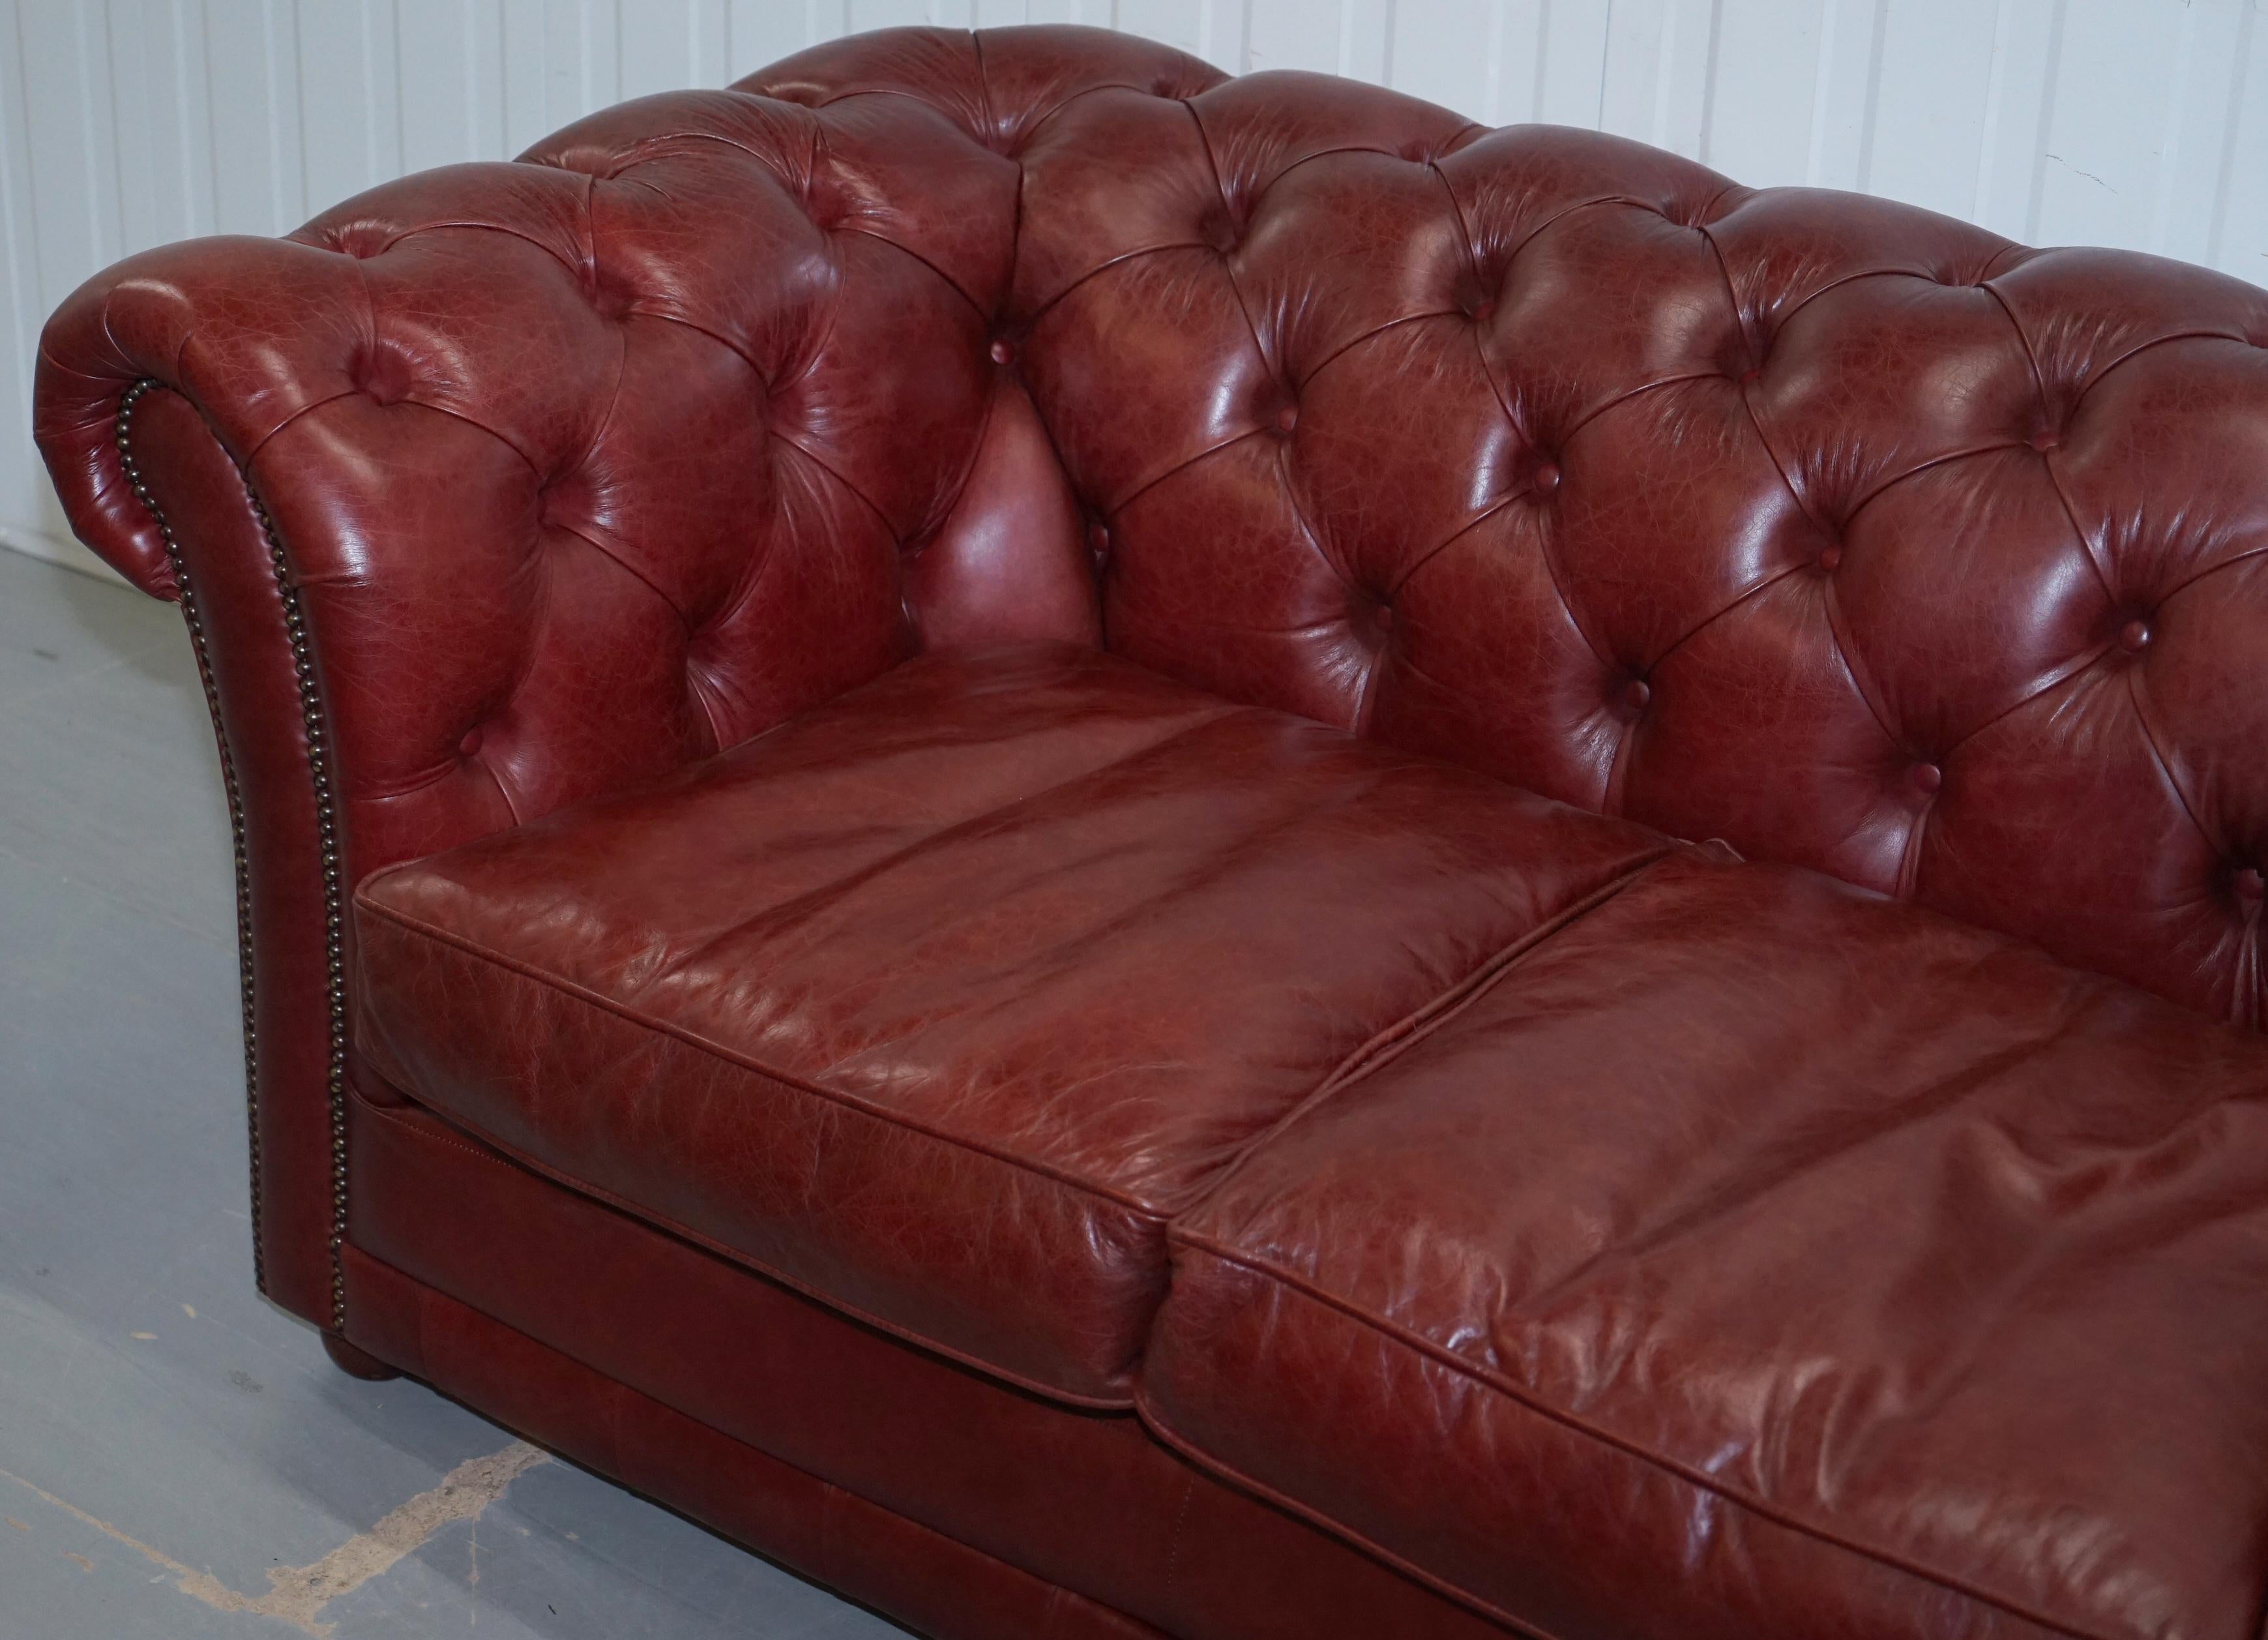 light brown leather chesterfield